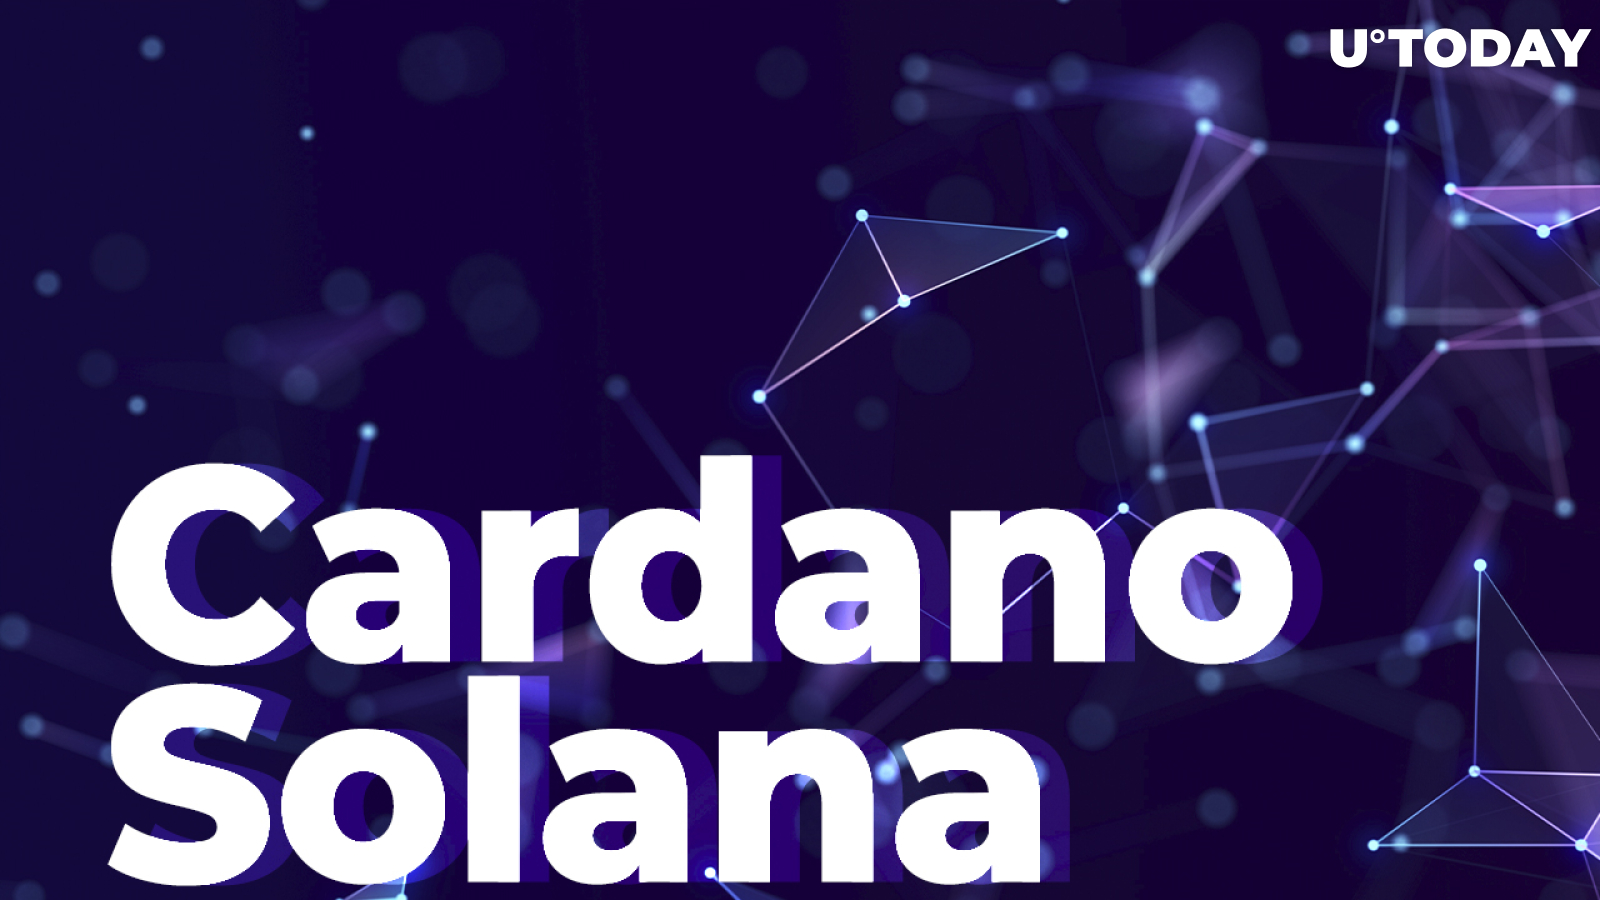 Cardano and Solana Surpass Top 10 Cryptos in Weekly Gains as Market Rebounds